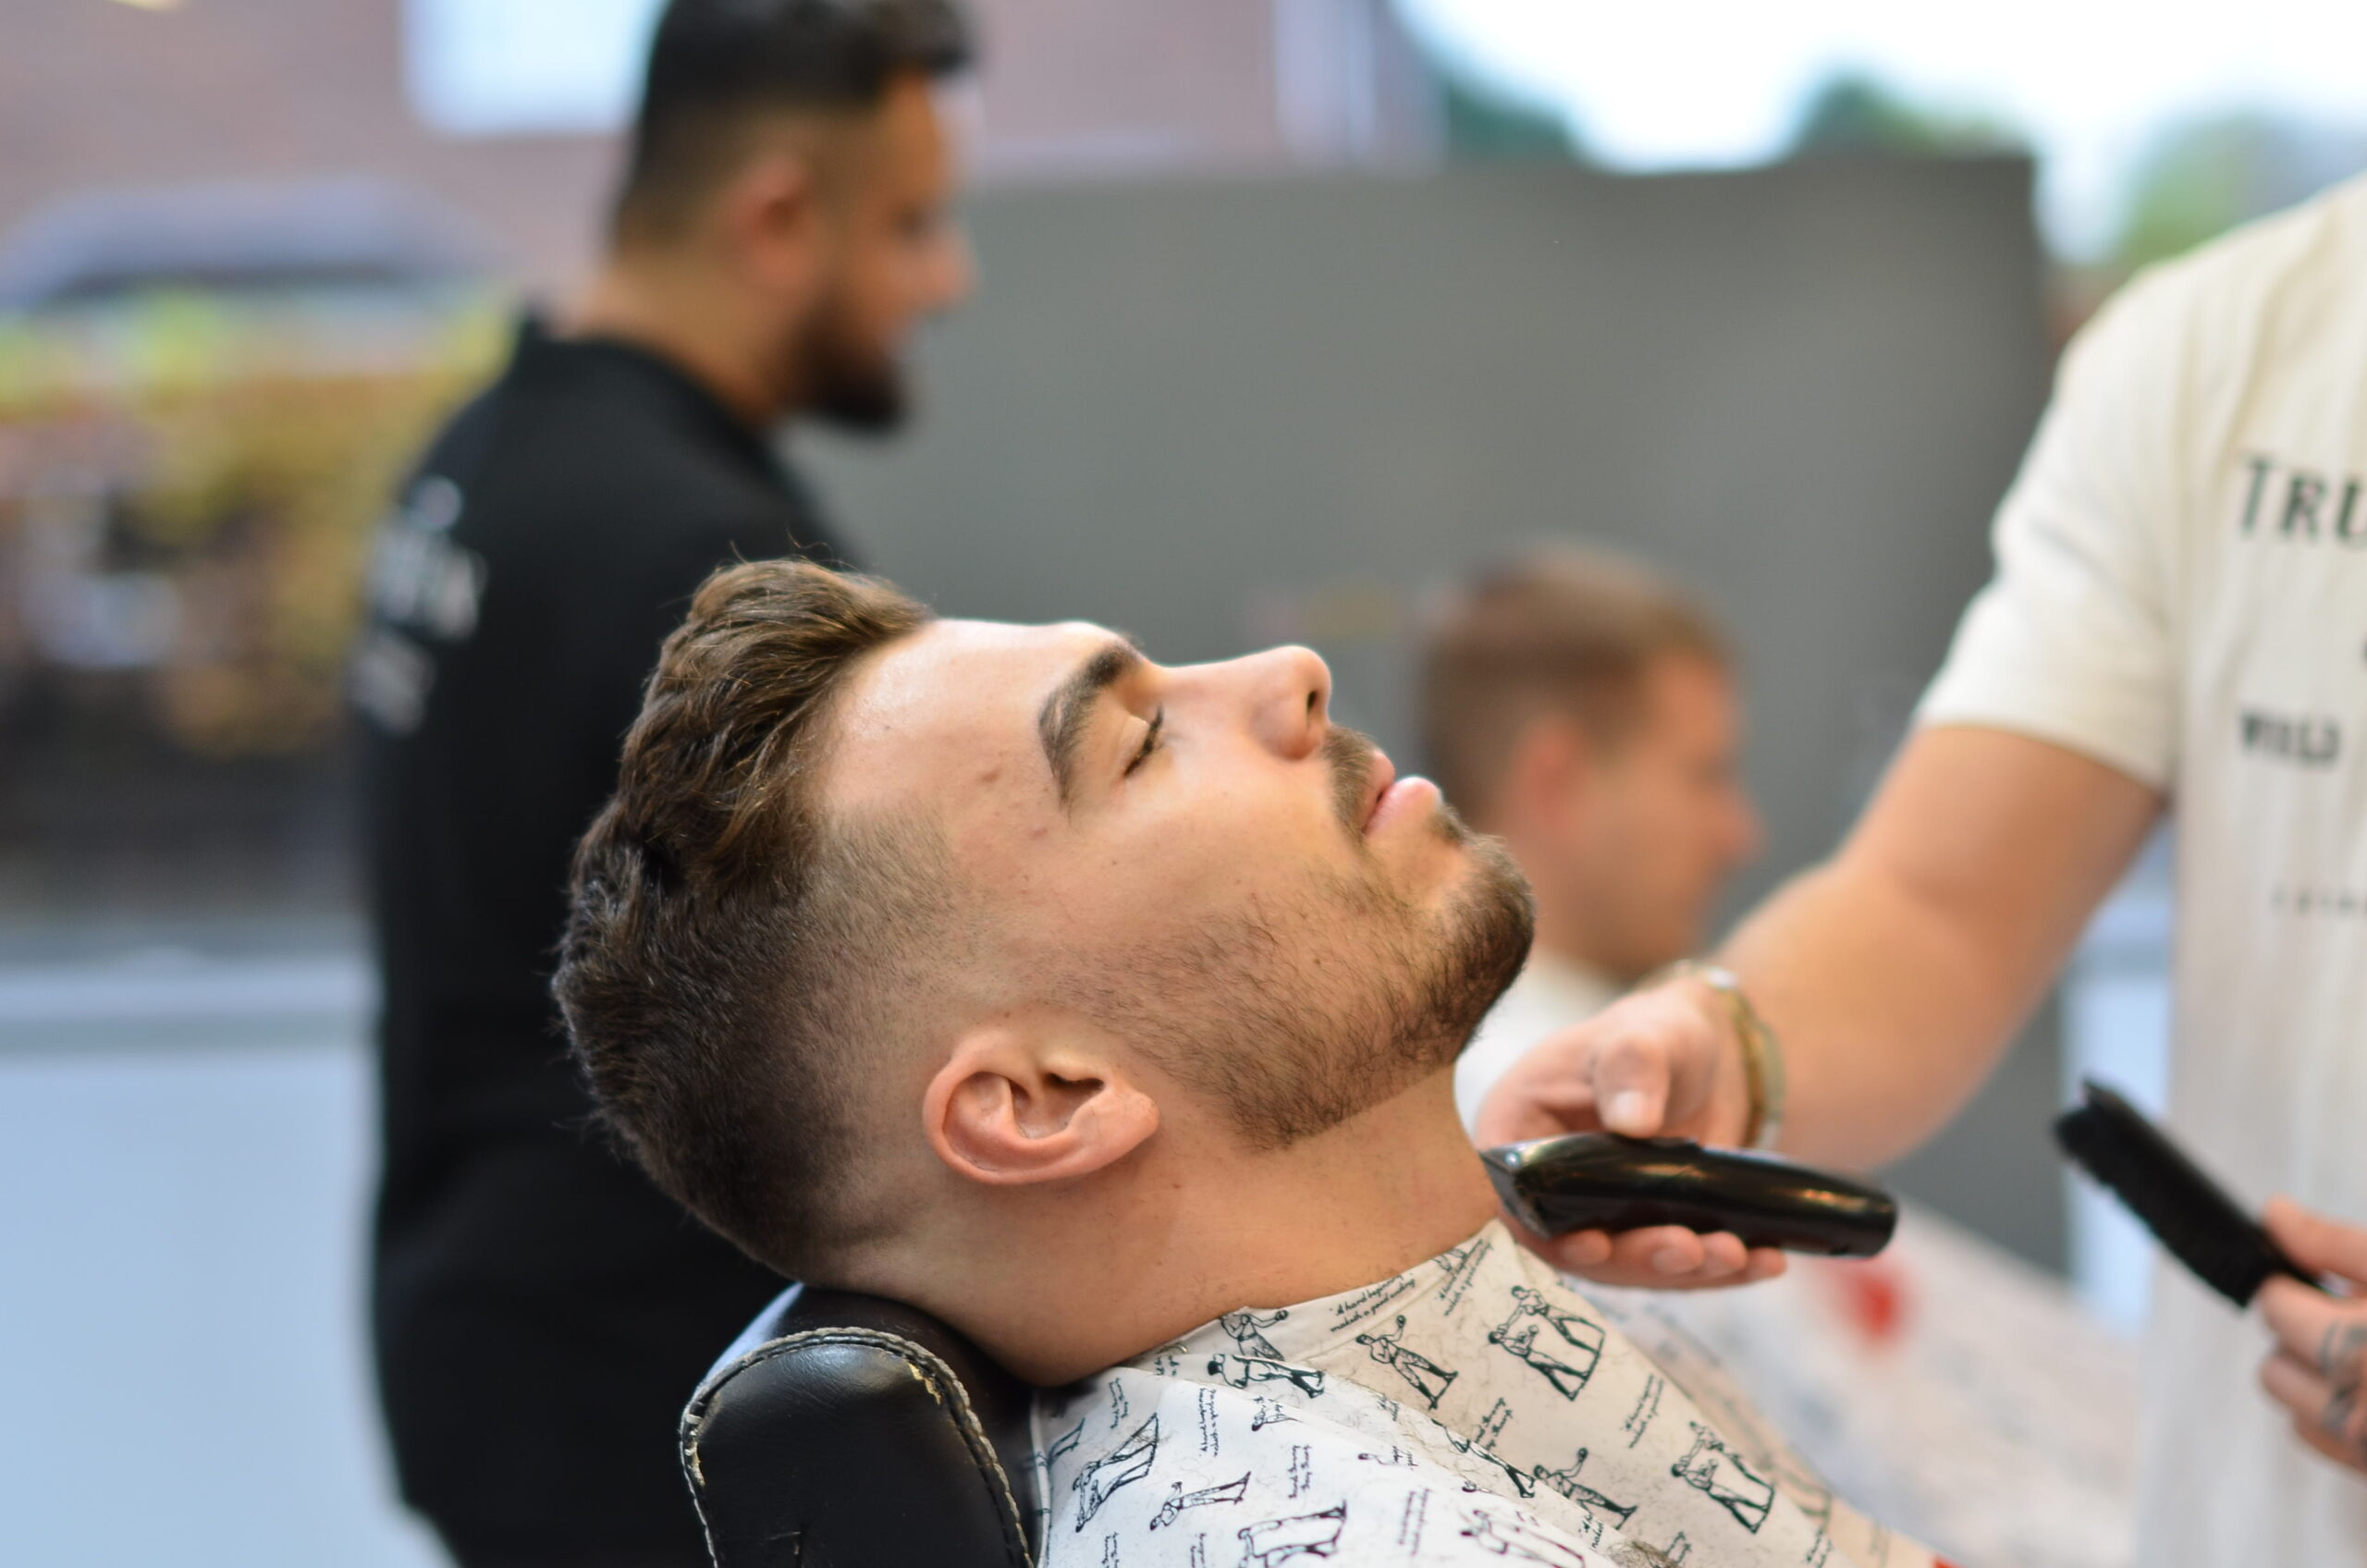 3 Things to Look for in a Good Barber